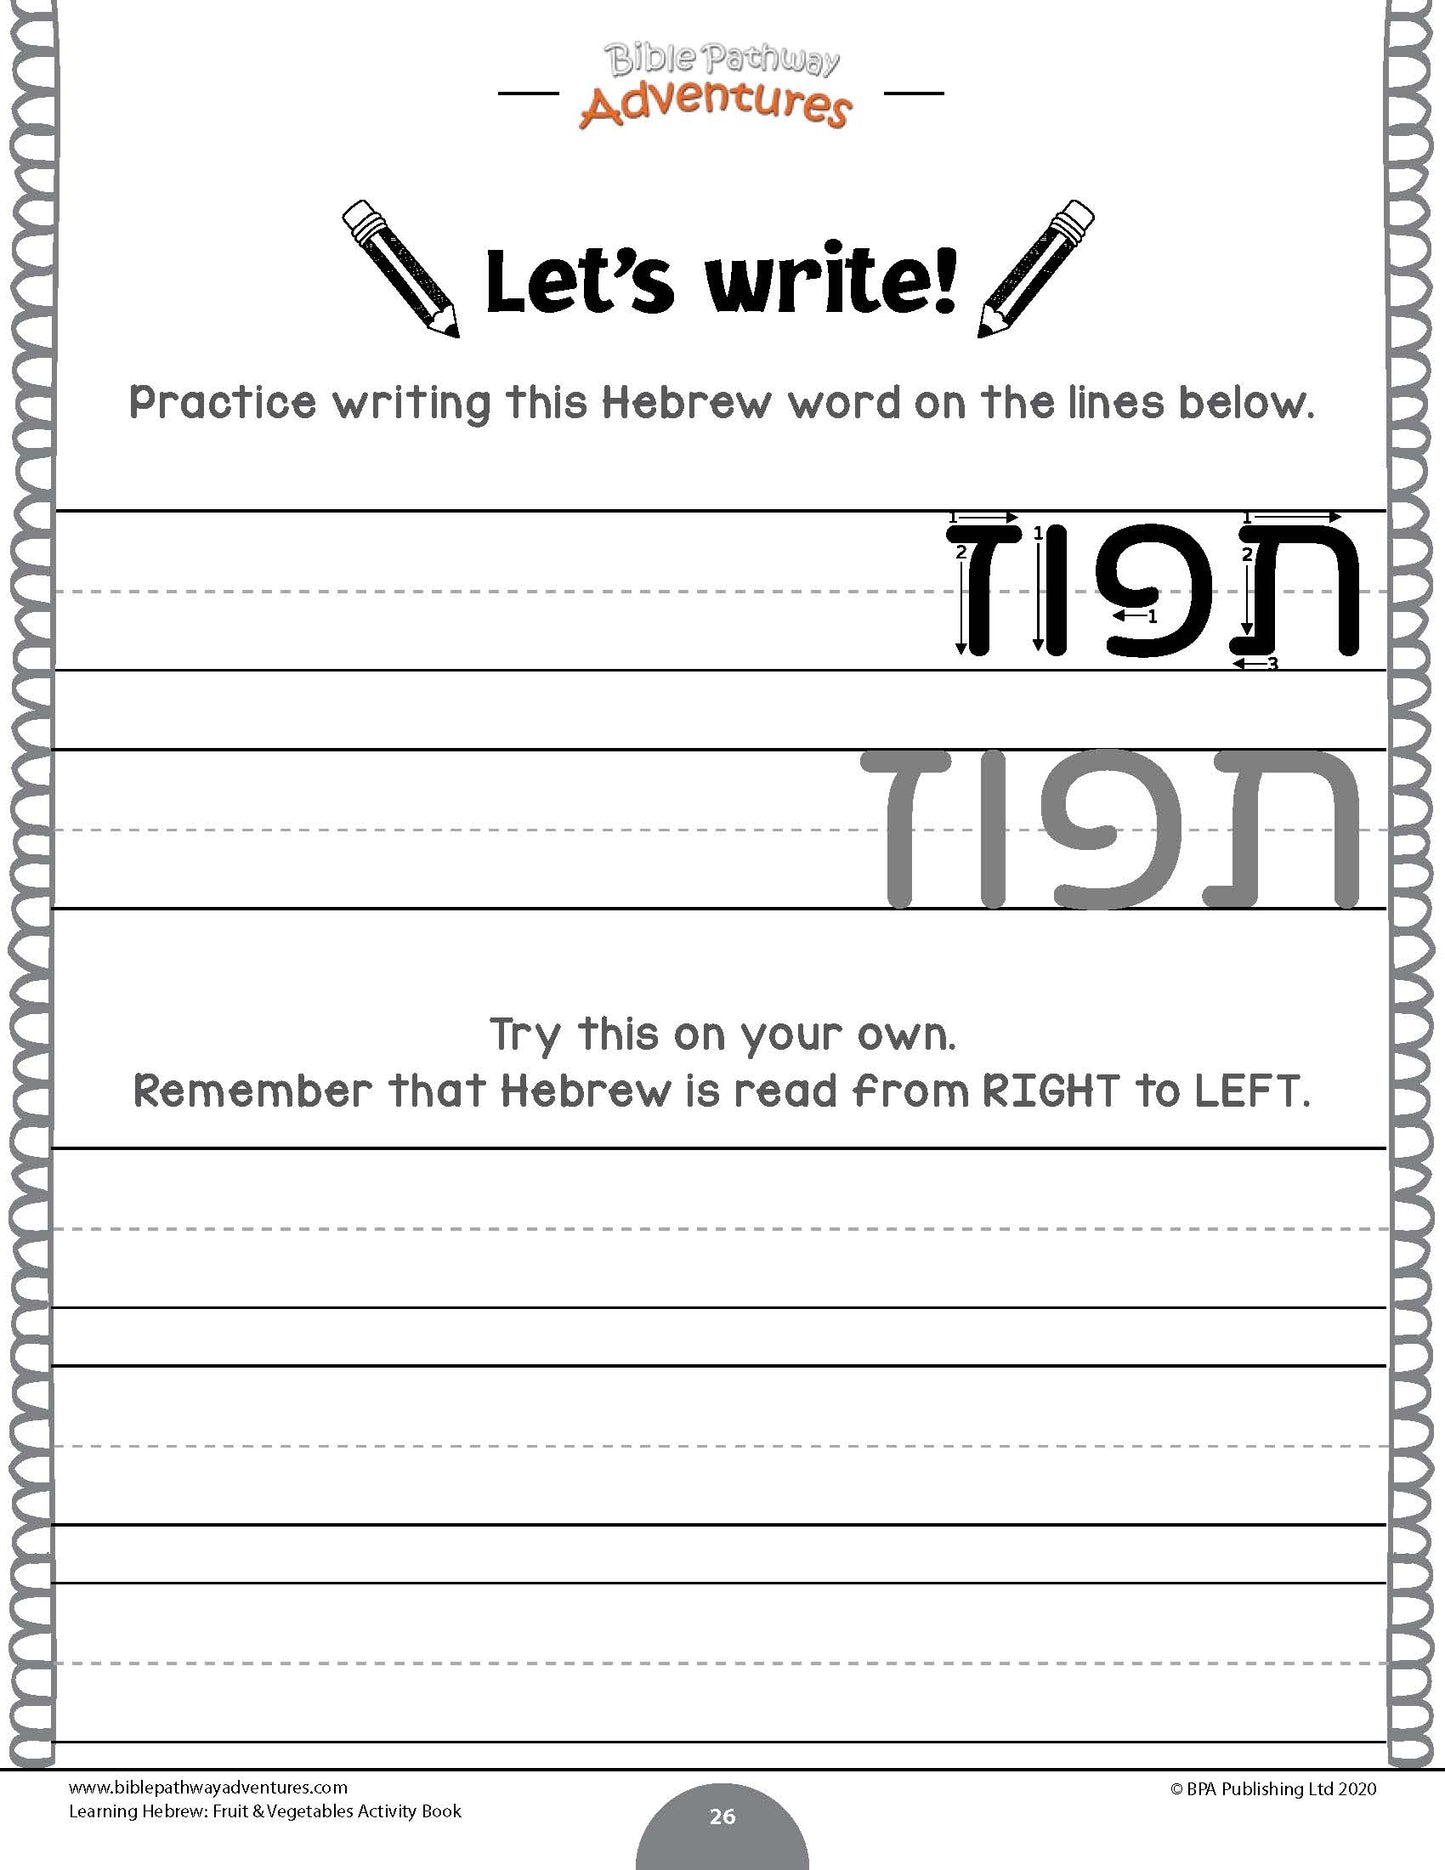 Learning Hebrew: Fruit & Vegetables Activity Book for Beginners